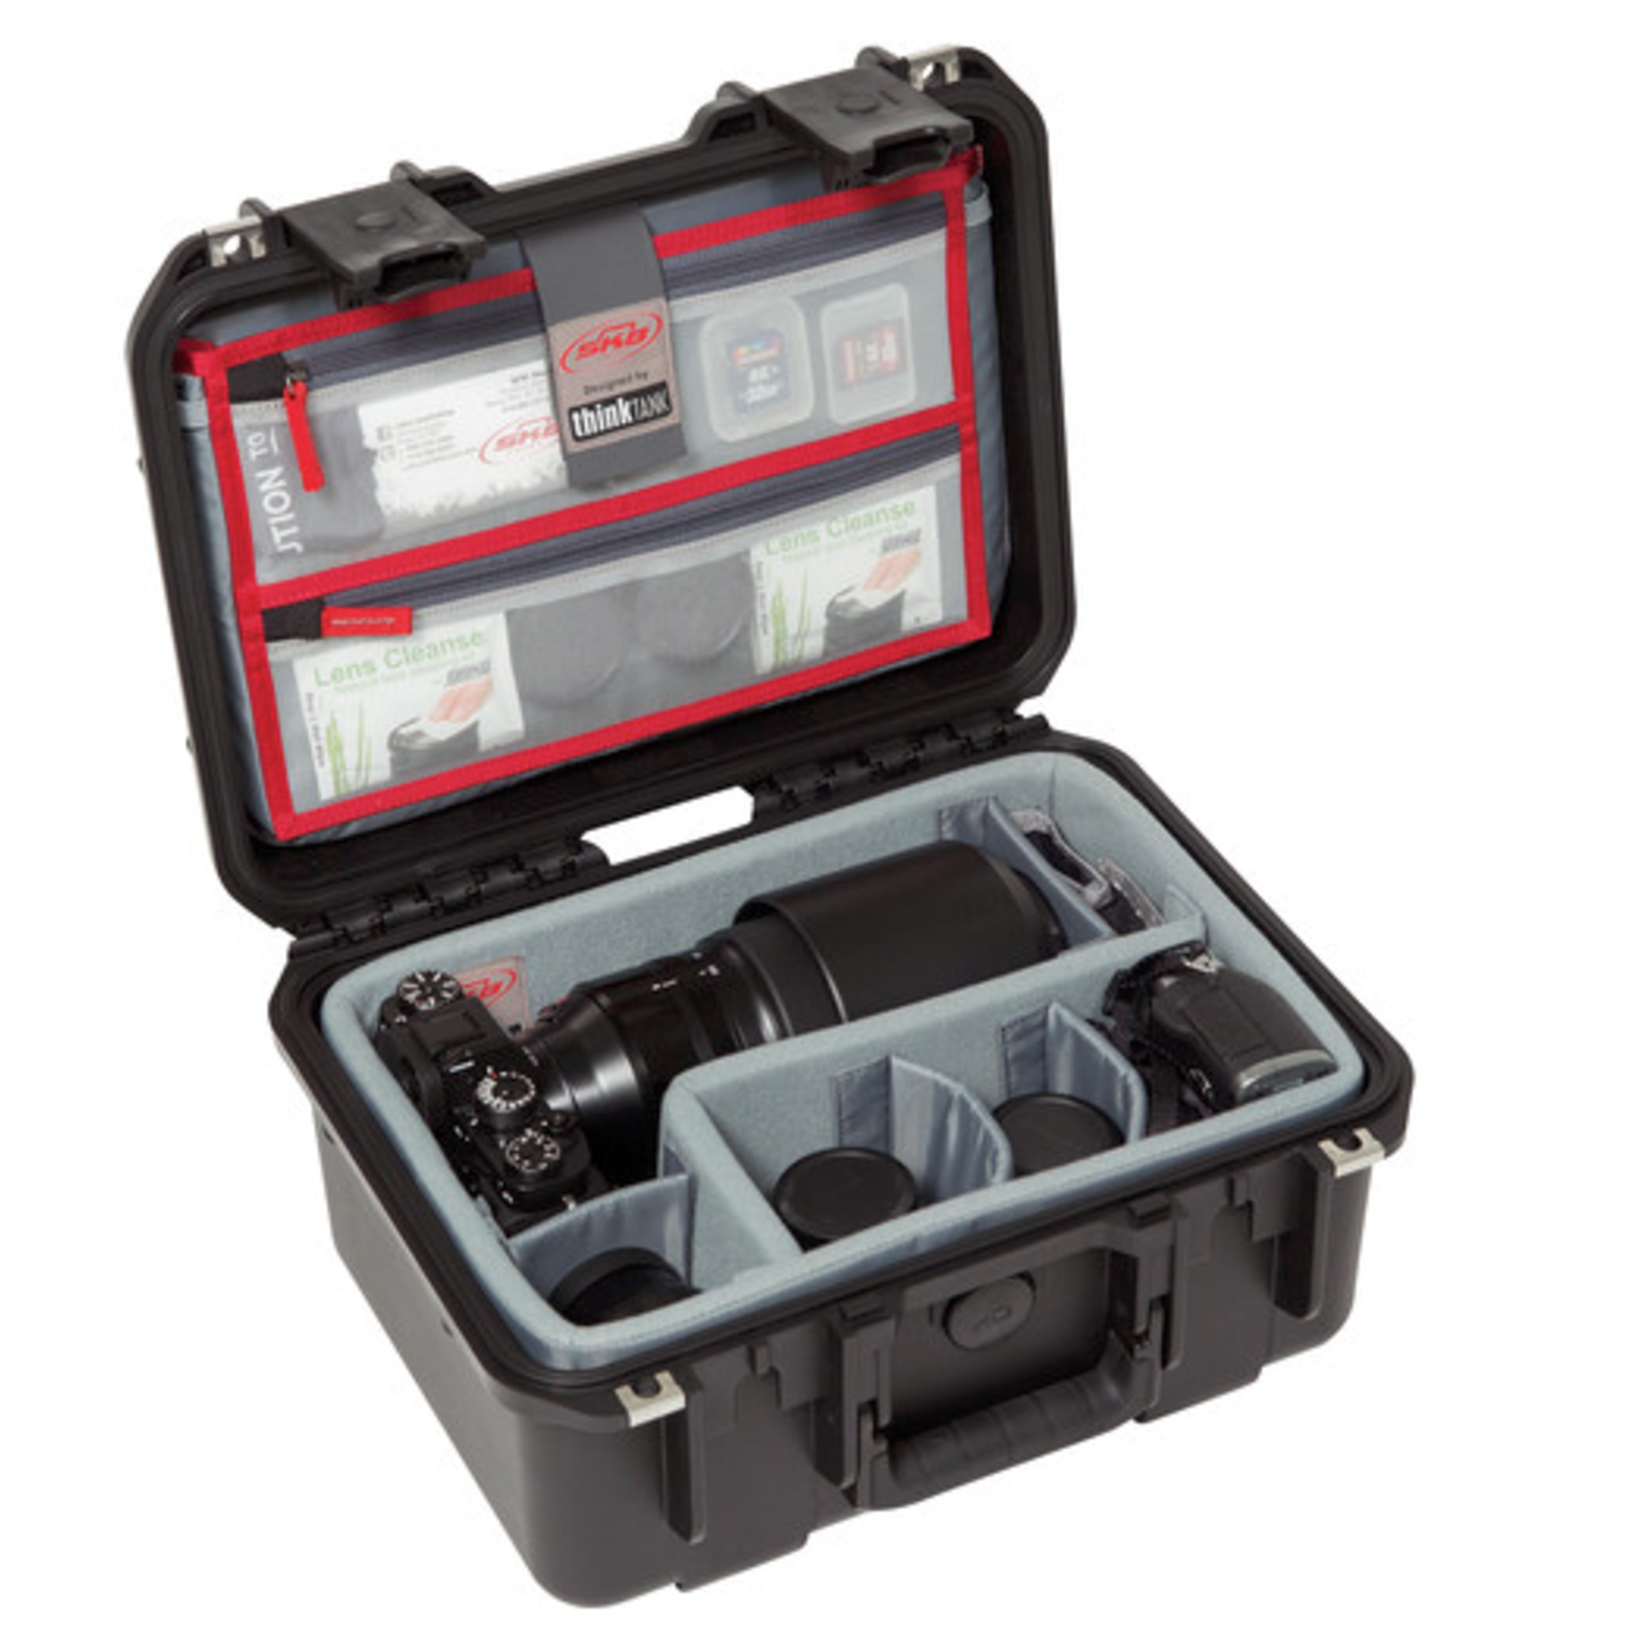 SKB Cases SKB iSeries 1309-6 Case with Think Tank Photo Dividers & Lid Organizer (Black)